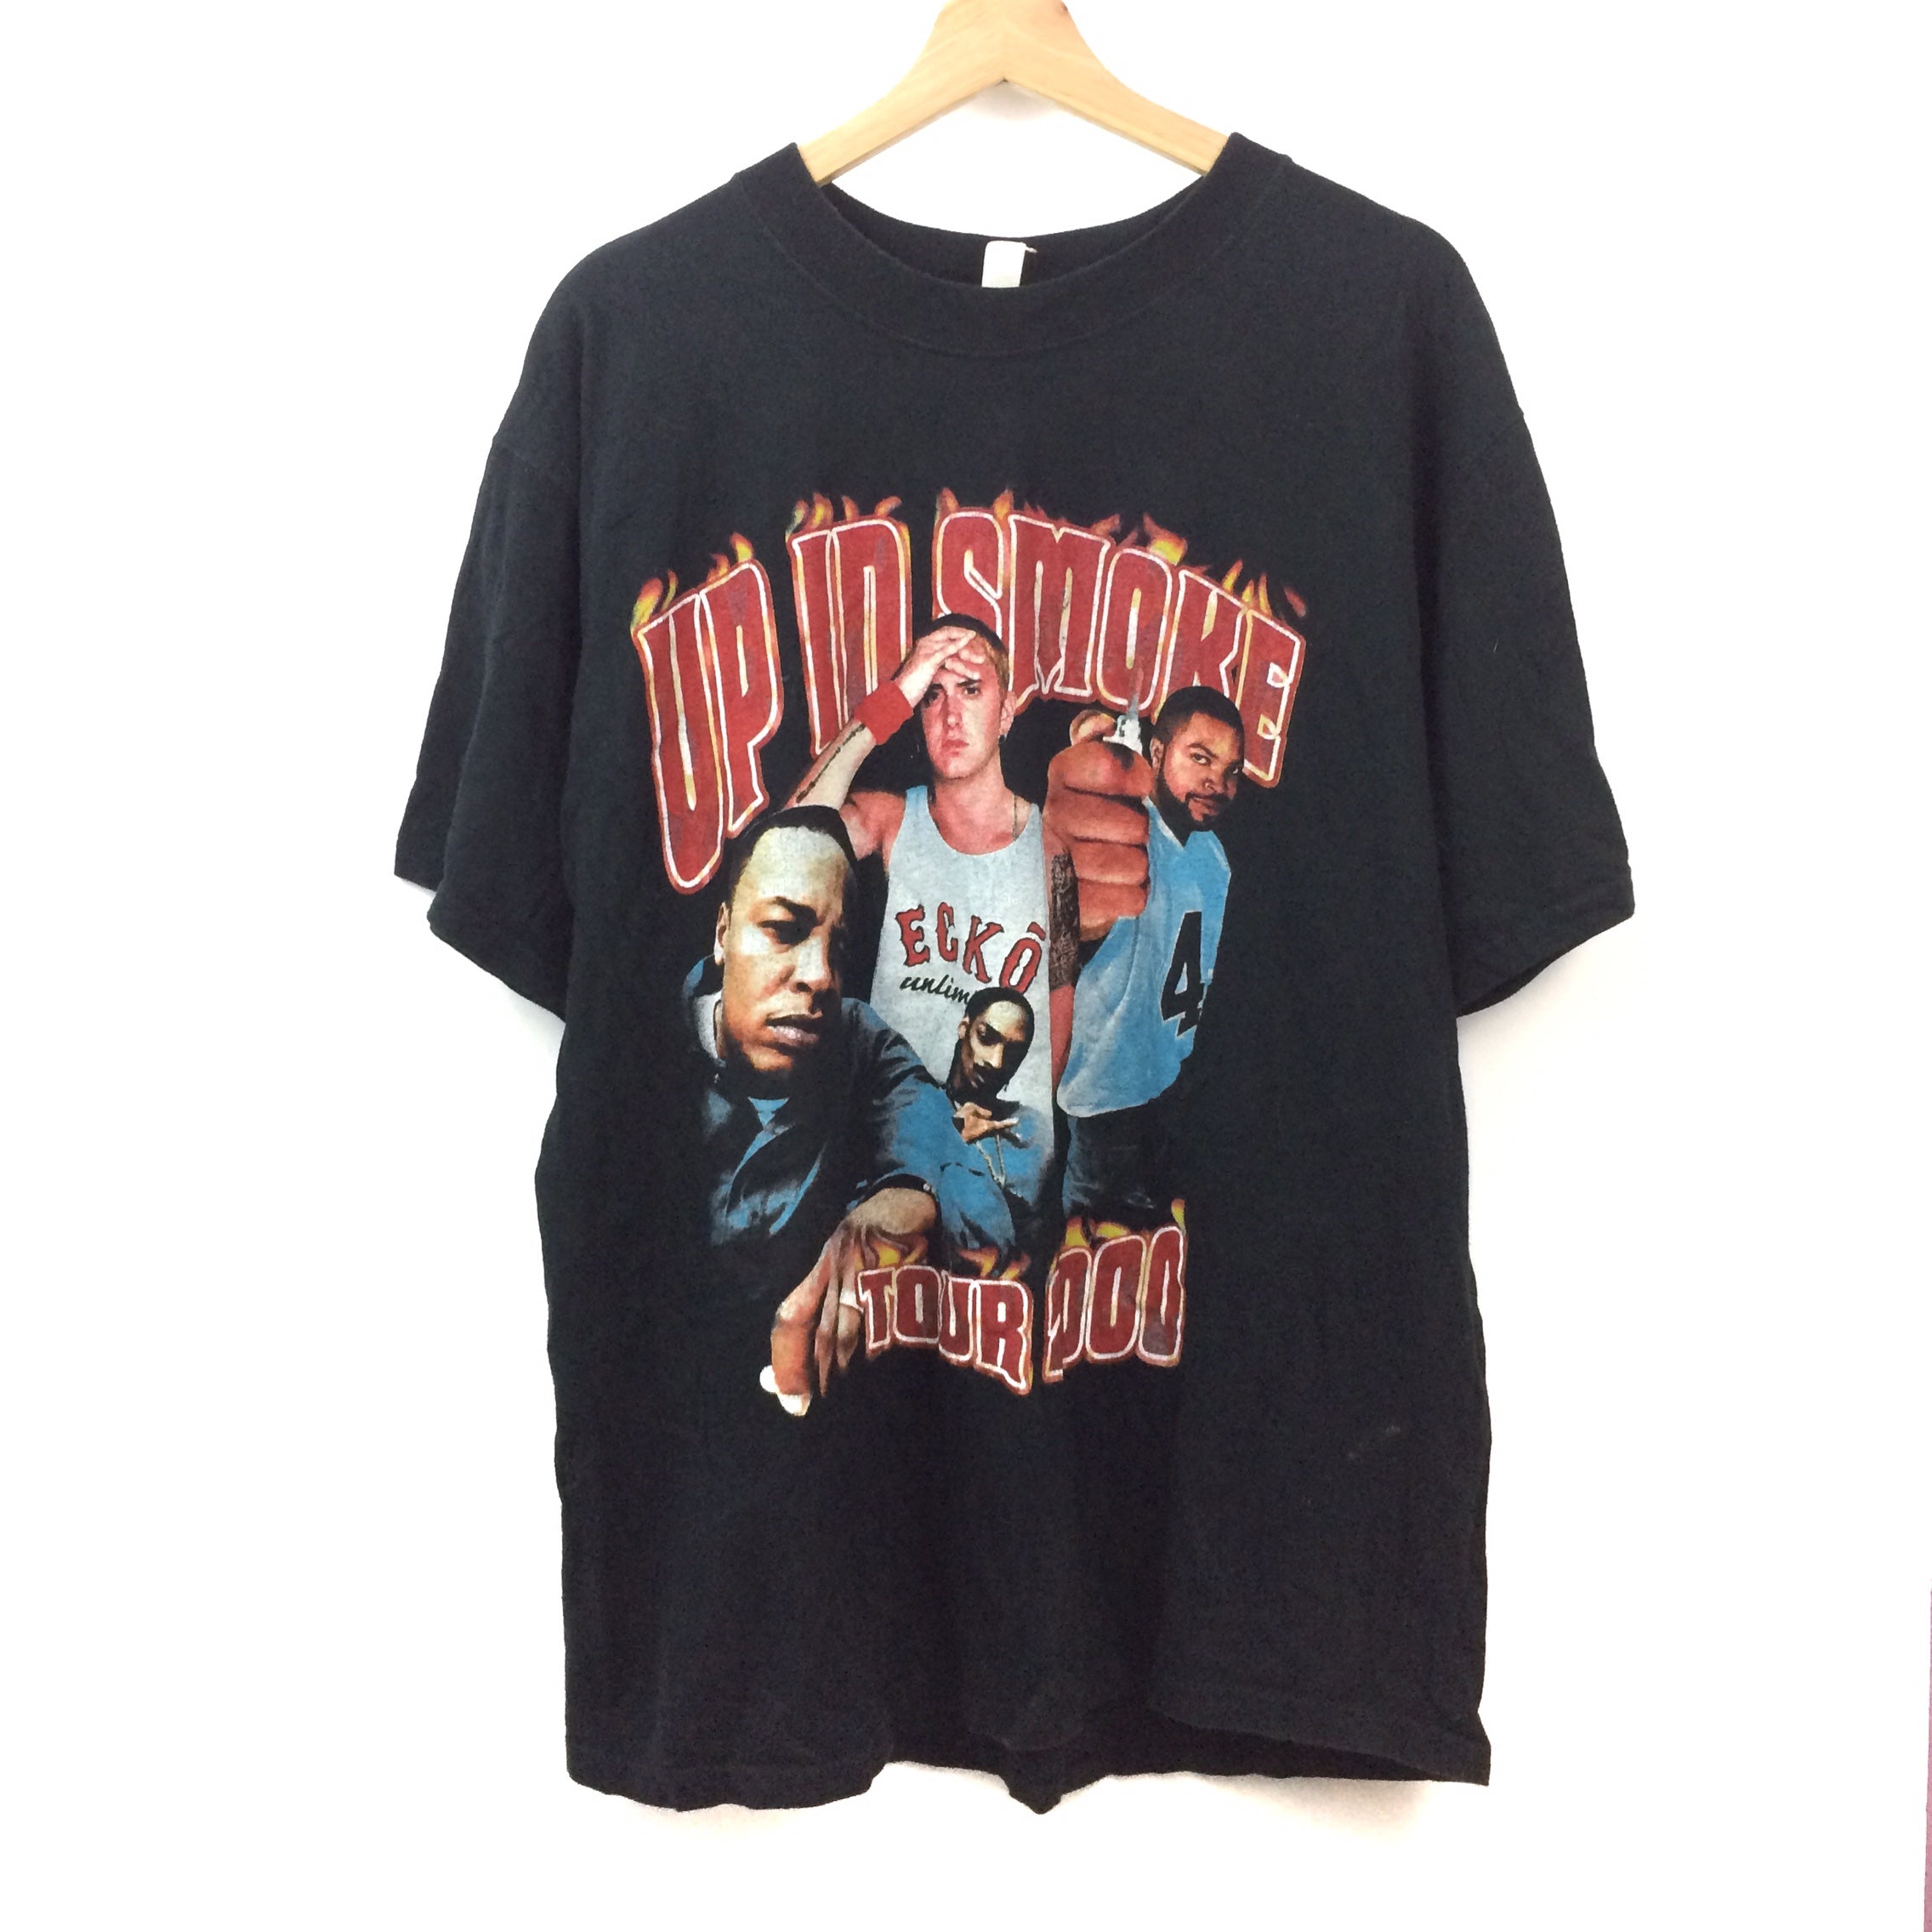 up in smoke tour tシャツ-